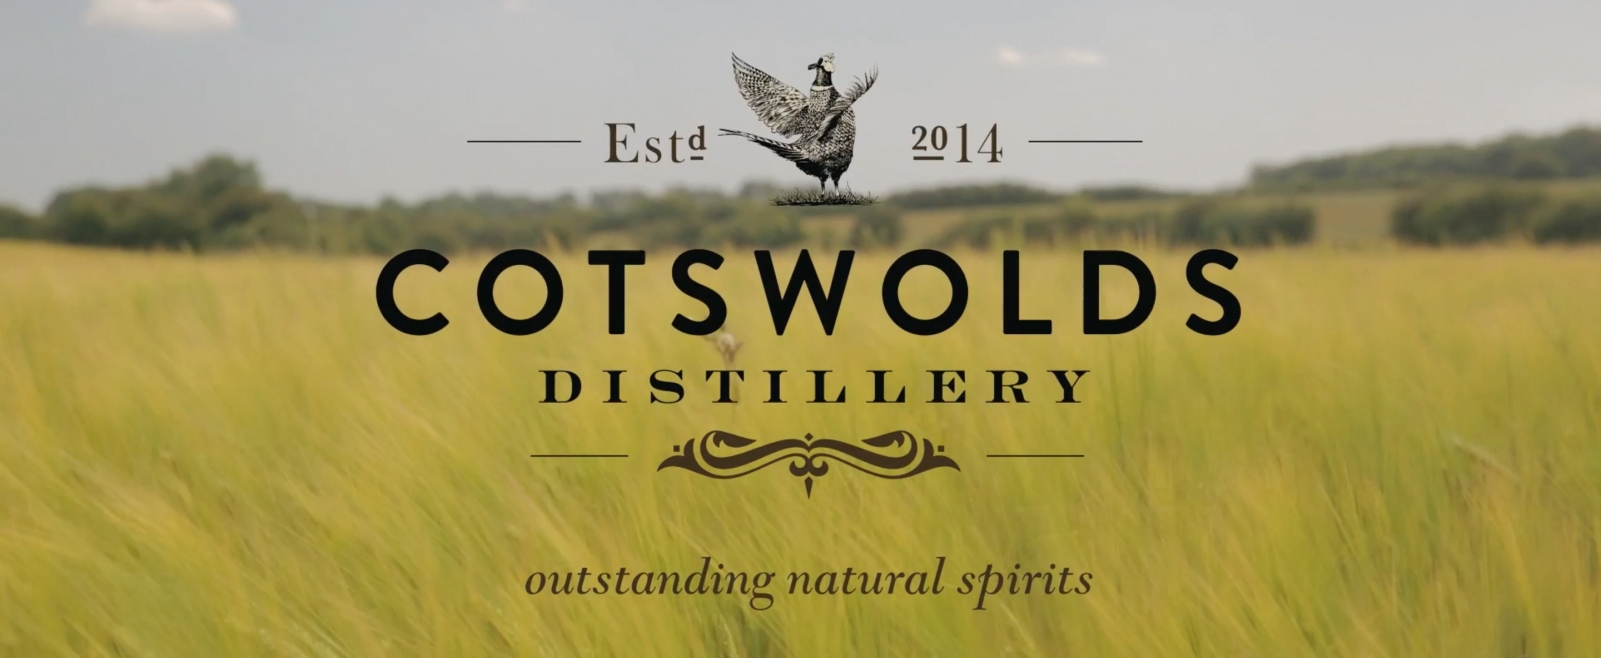 THE COTSWOLDS DISTILLERY